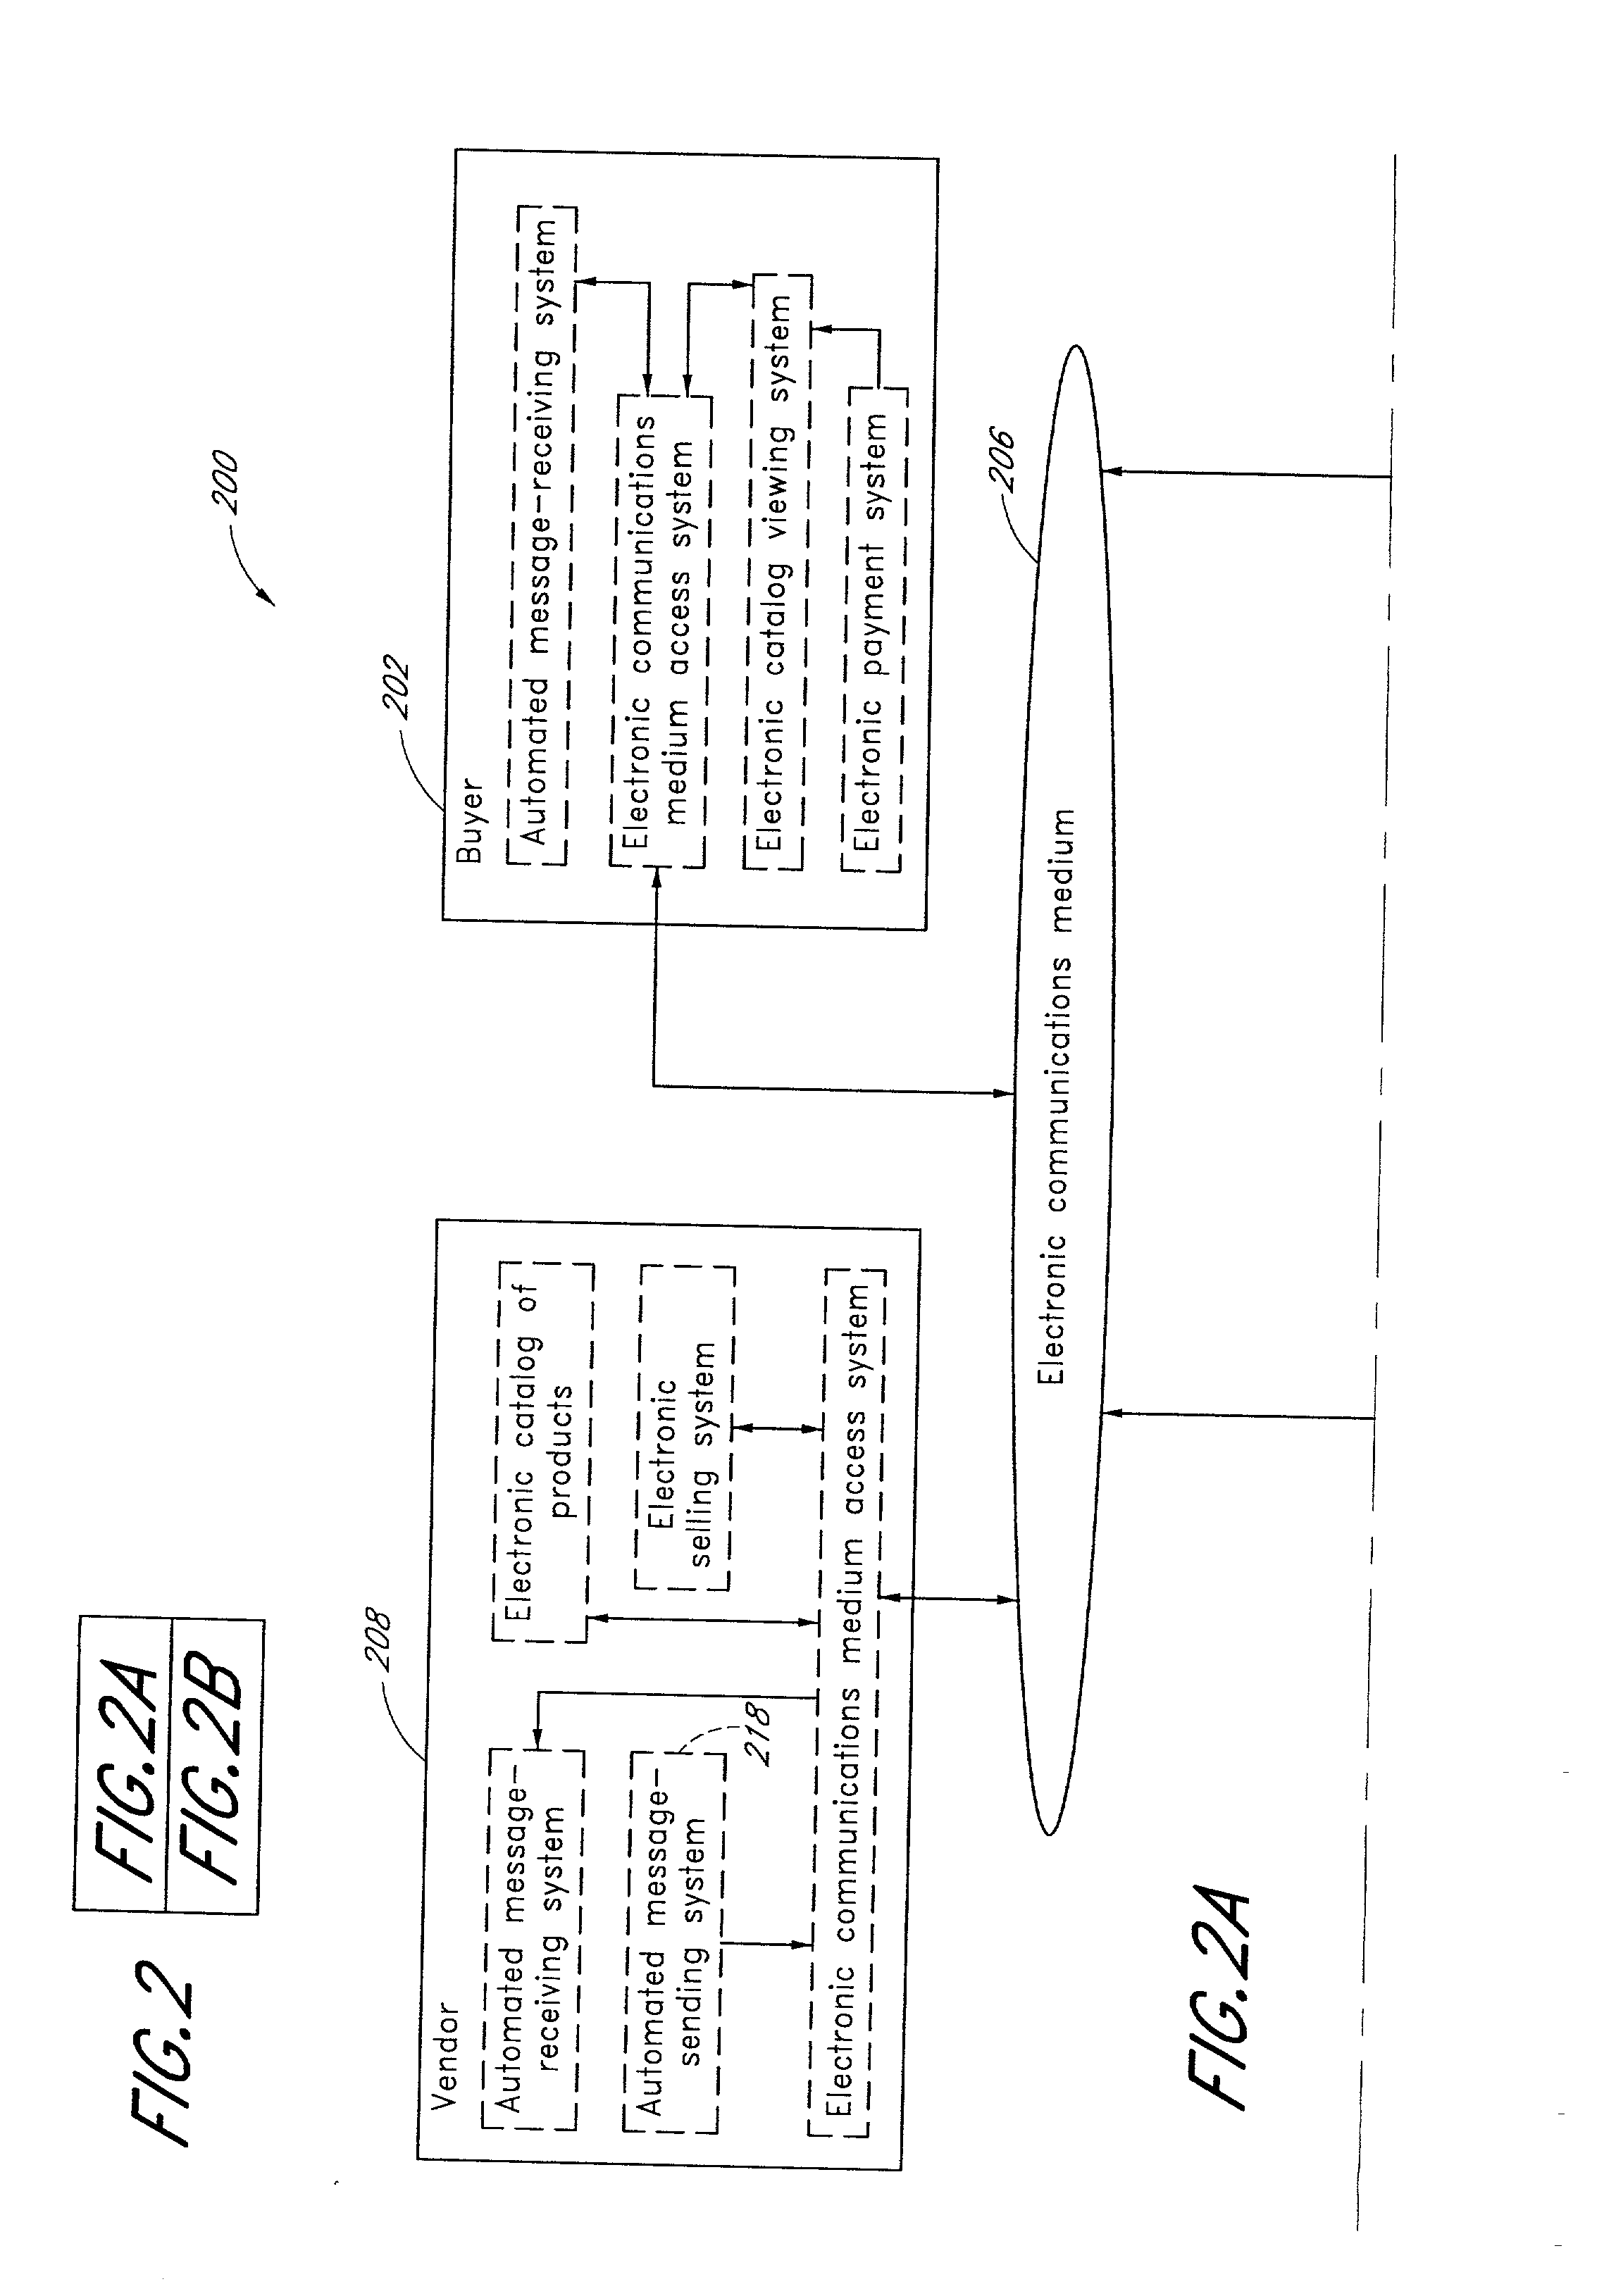 Methods and systems for the physical delivery of goods ordered through an electronic network